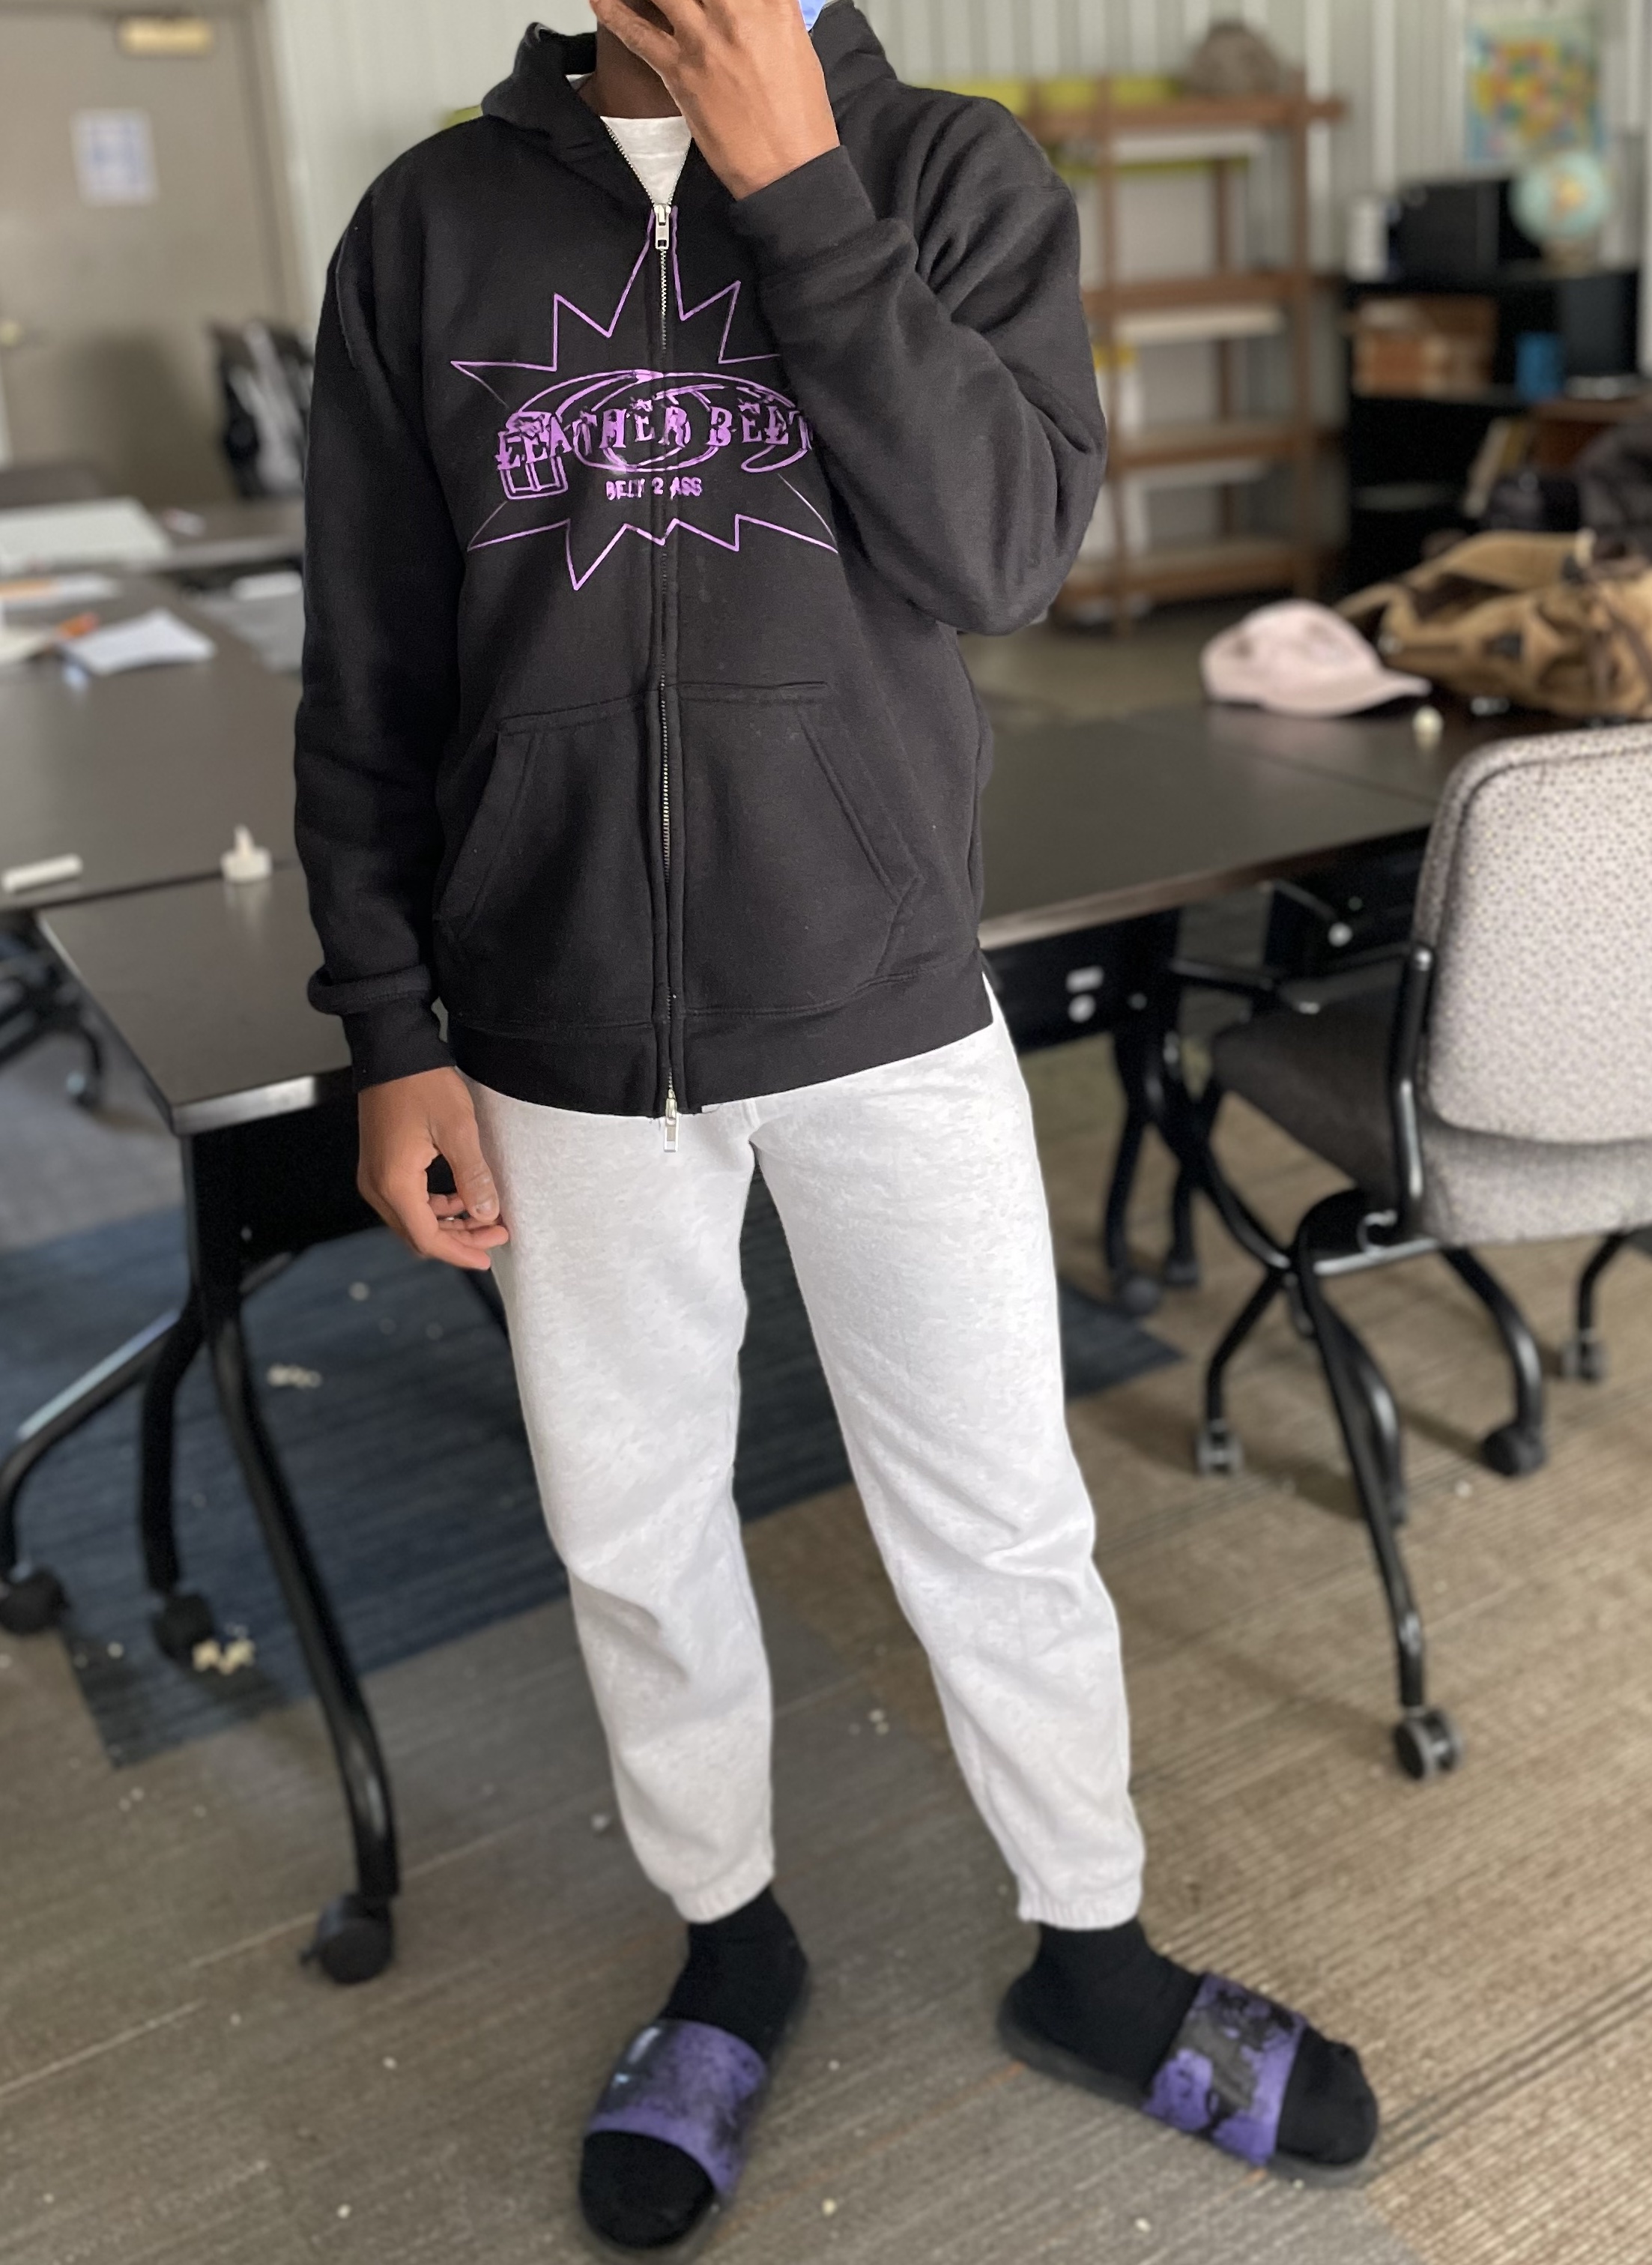 Student posing with their "Leather Belt" branded sweatshirt and slides